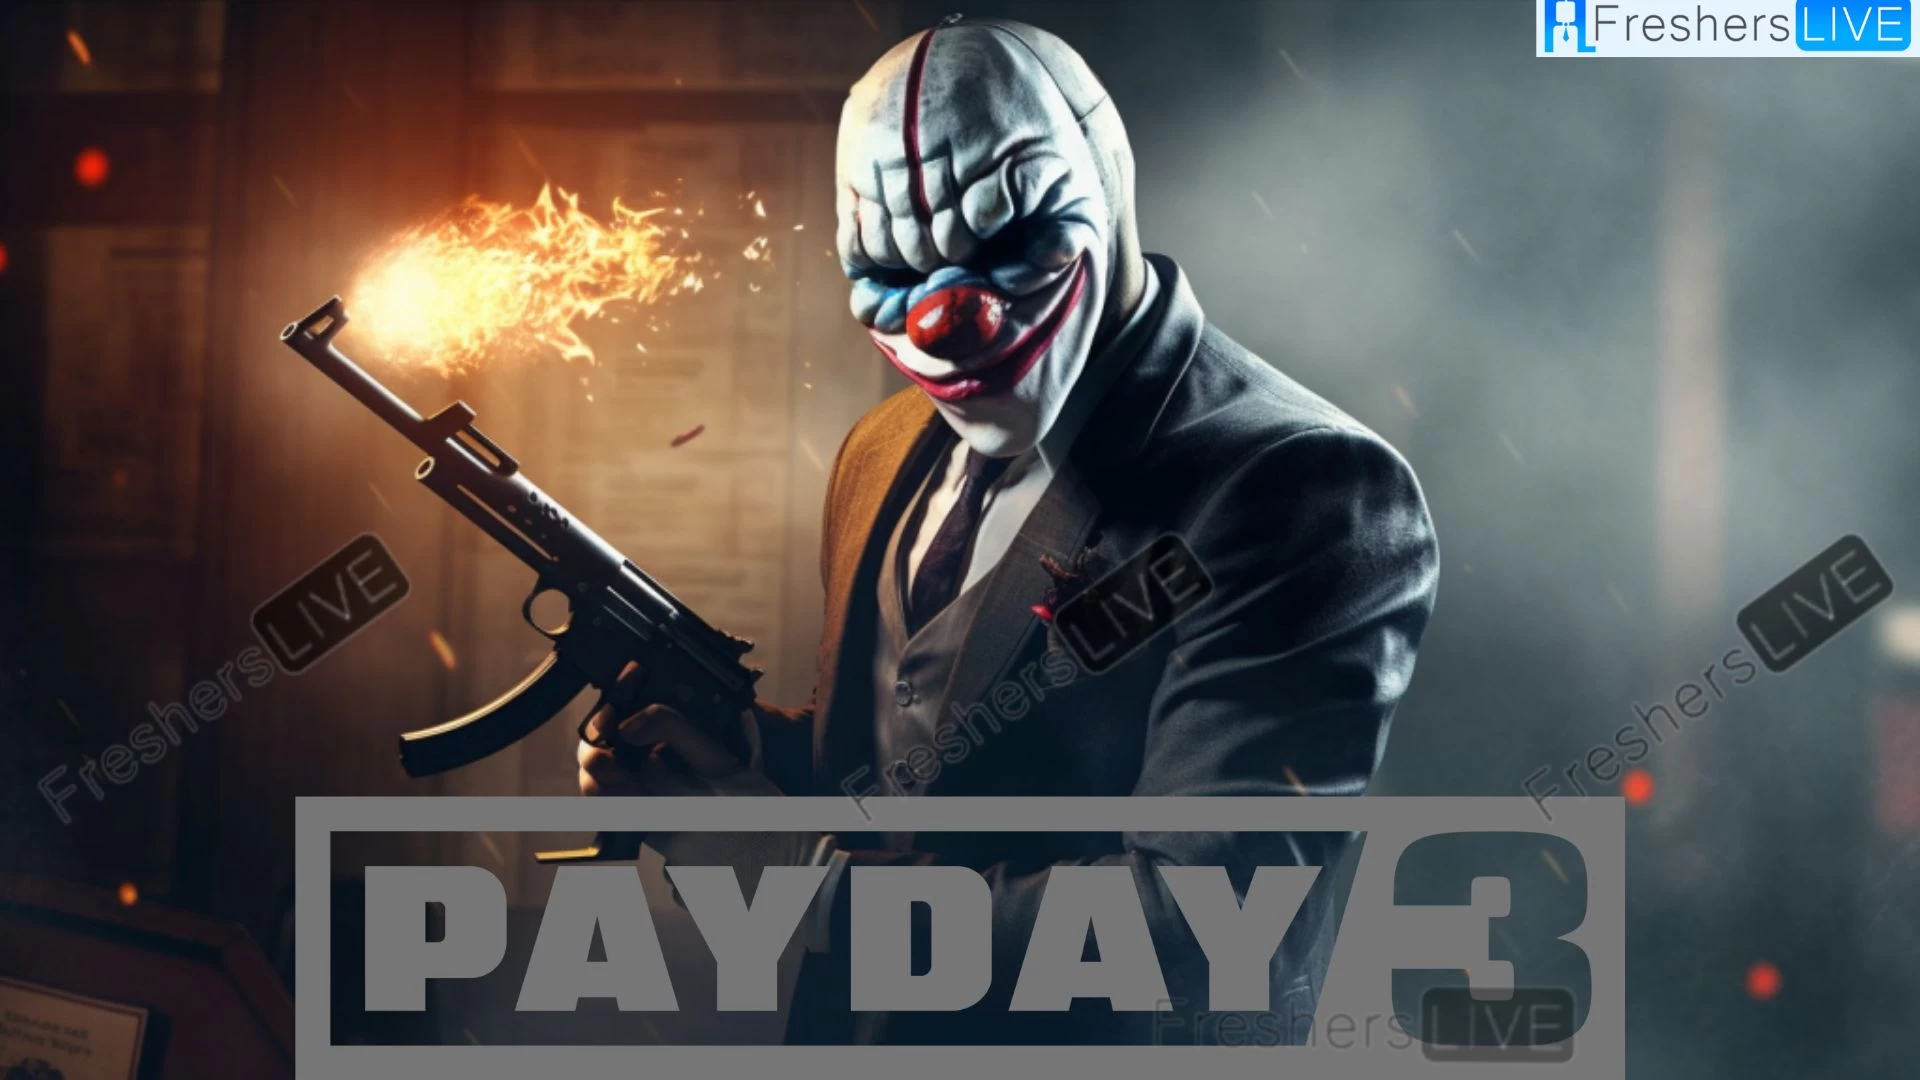 Payday 3 Road Rage Not Working, How to Fix Payday 3 Road Rage Not Working?